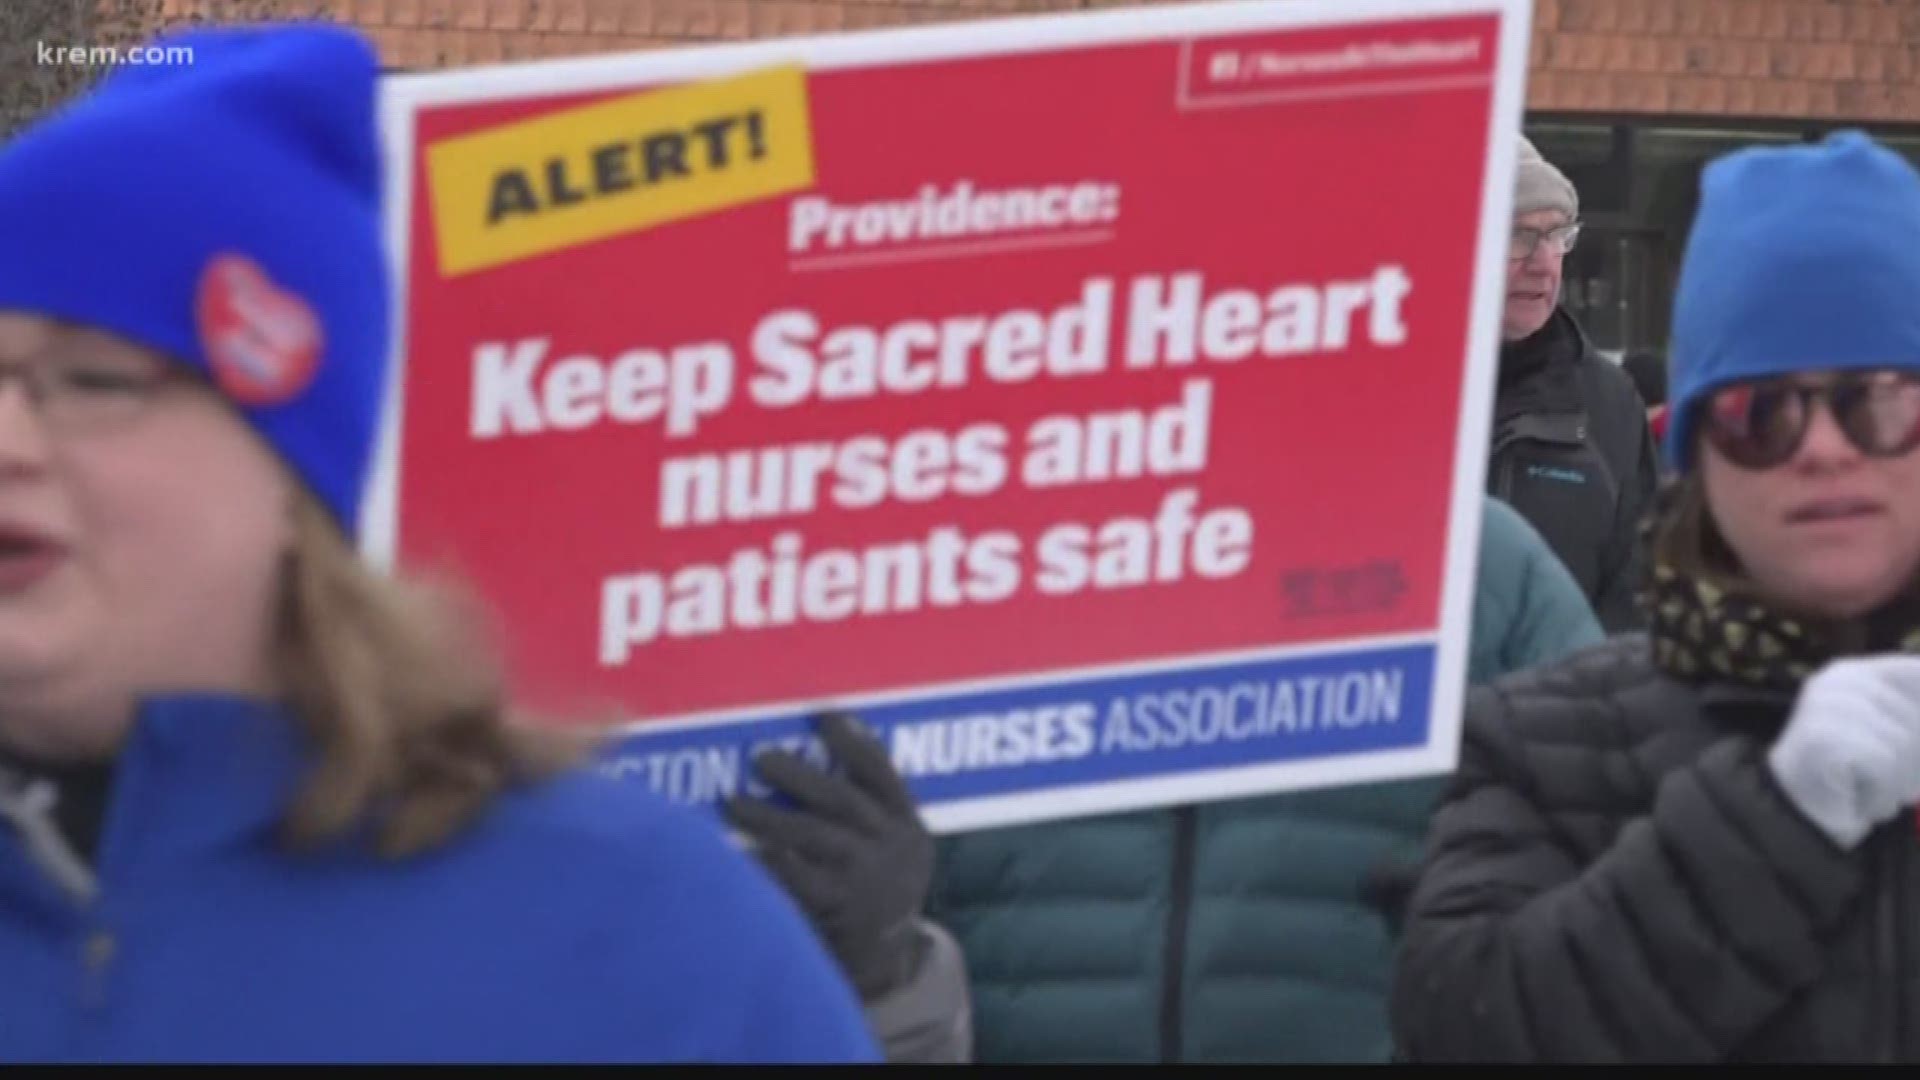 The union said the decision not to strike came after the Providence Board of Directors canceled an offering cutting nurses' sick leave.